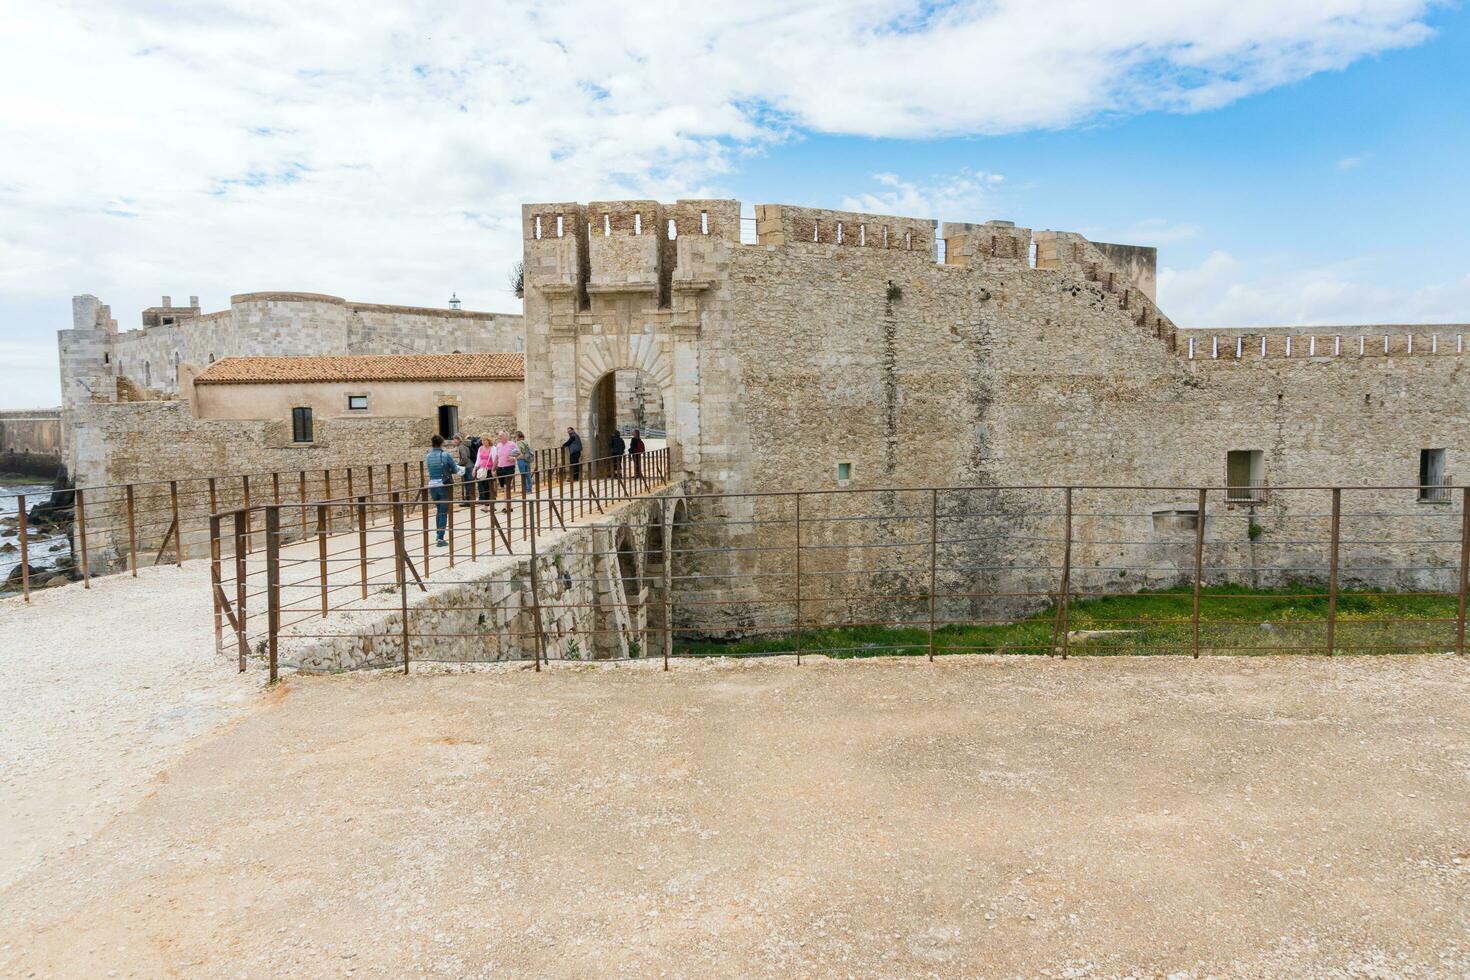 Syracuse, Italy-May 9, 2022-people visit the famous Maniace Castle on the island of Ortigia in Syracuse during a sunny day photo